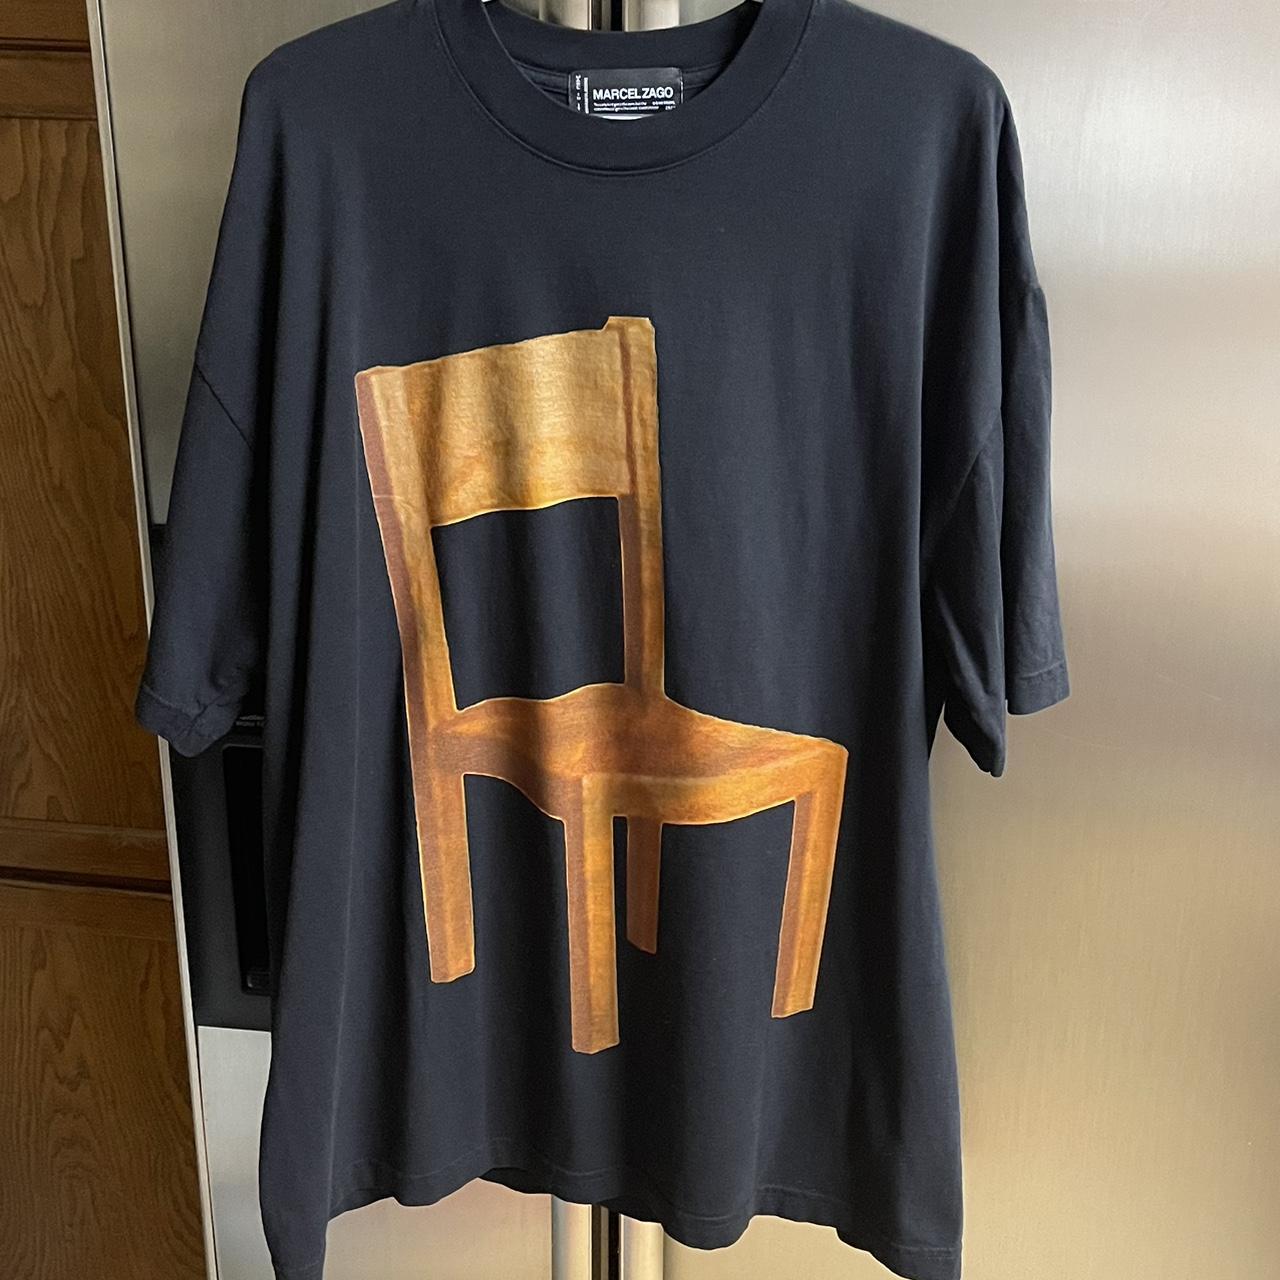 Off-White Men's Black and Brown T-shirt